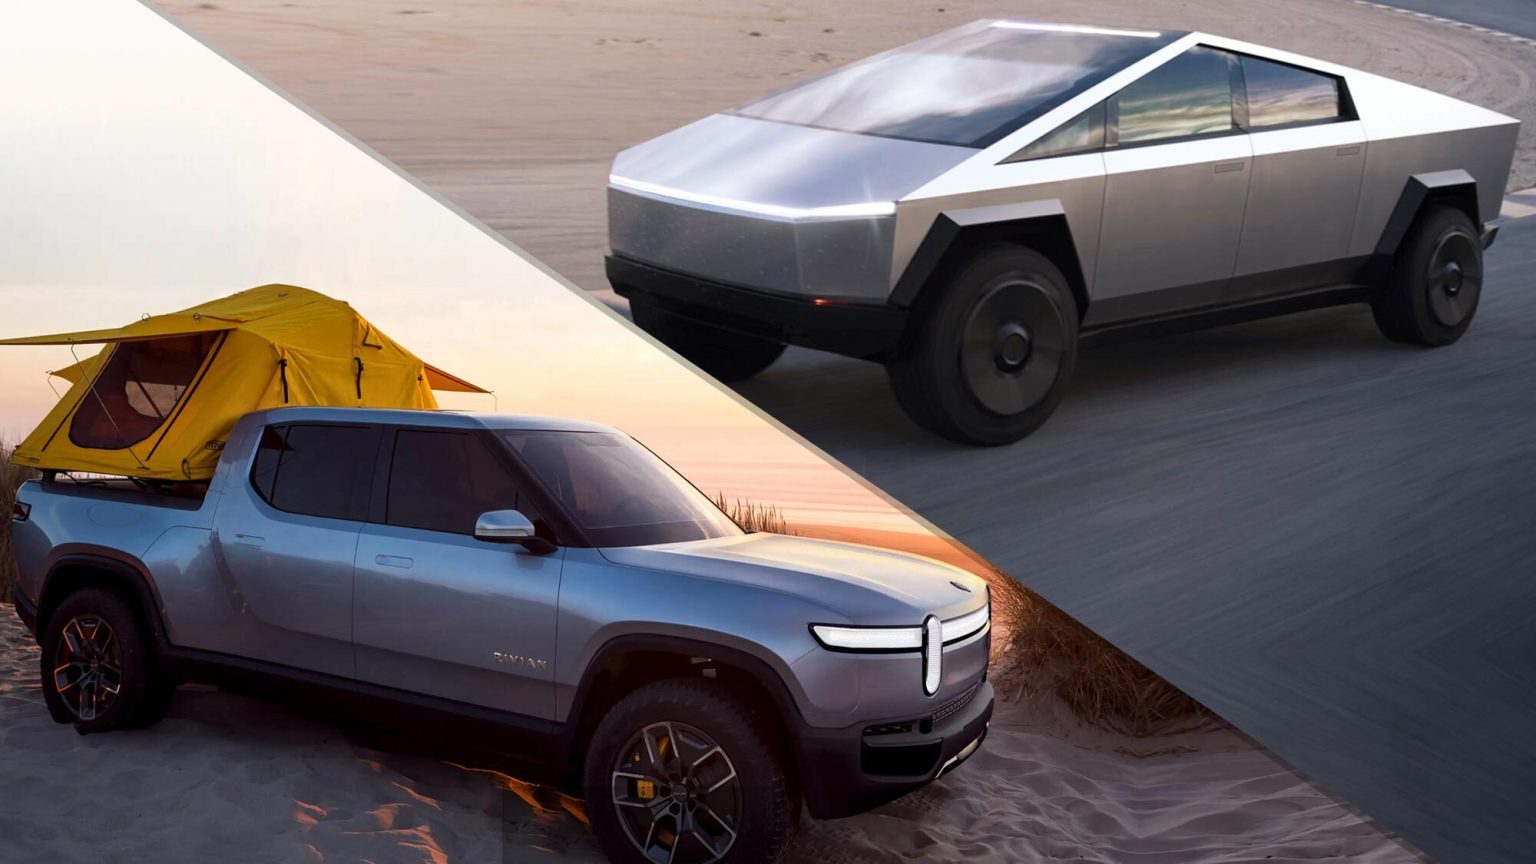 The Rise of Electric Pickup Trucks Analyzing the Rivian R1T and Tesla Cybertruck